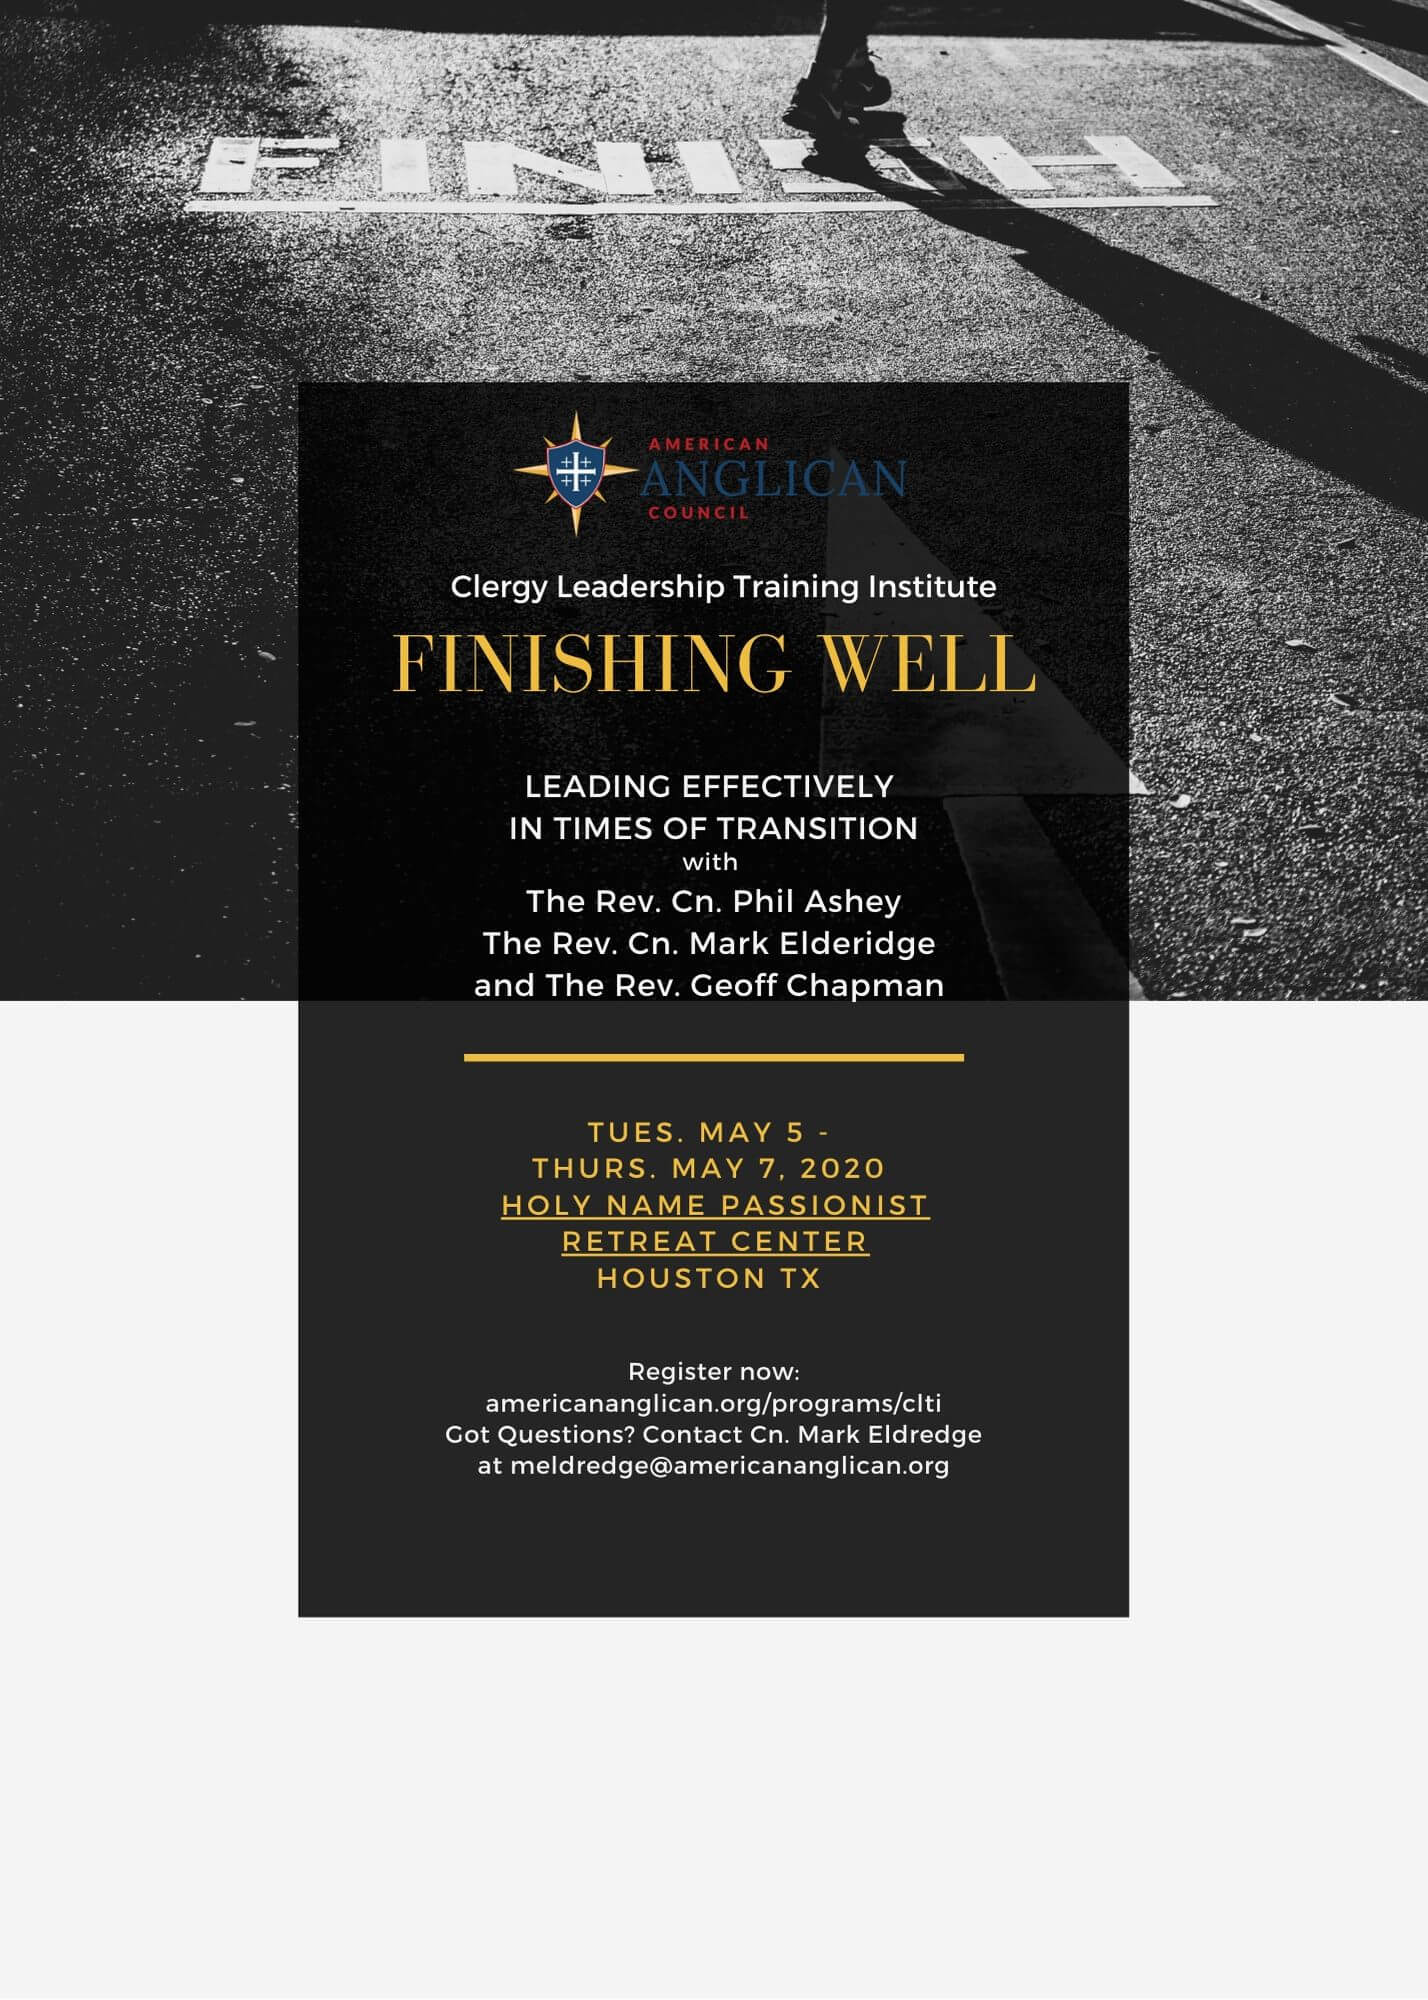 Houston to Host Finishing Well CLTI Conference